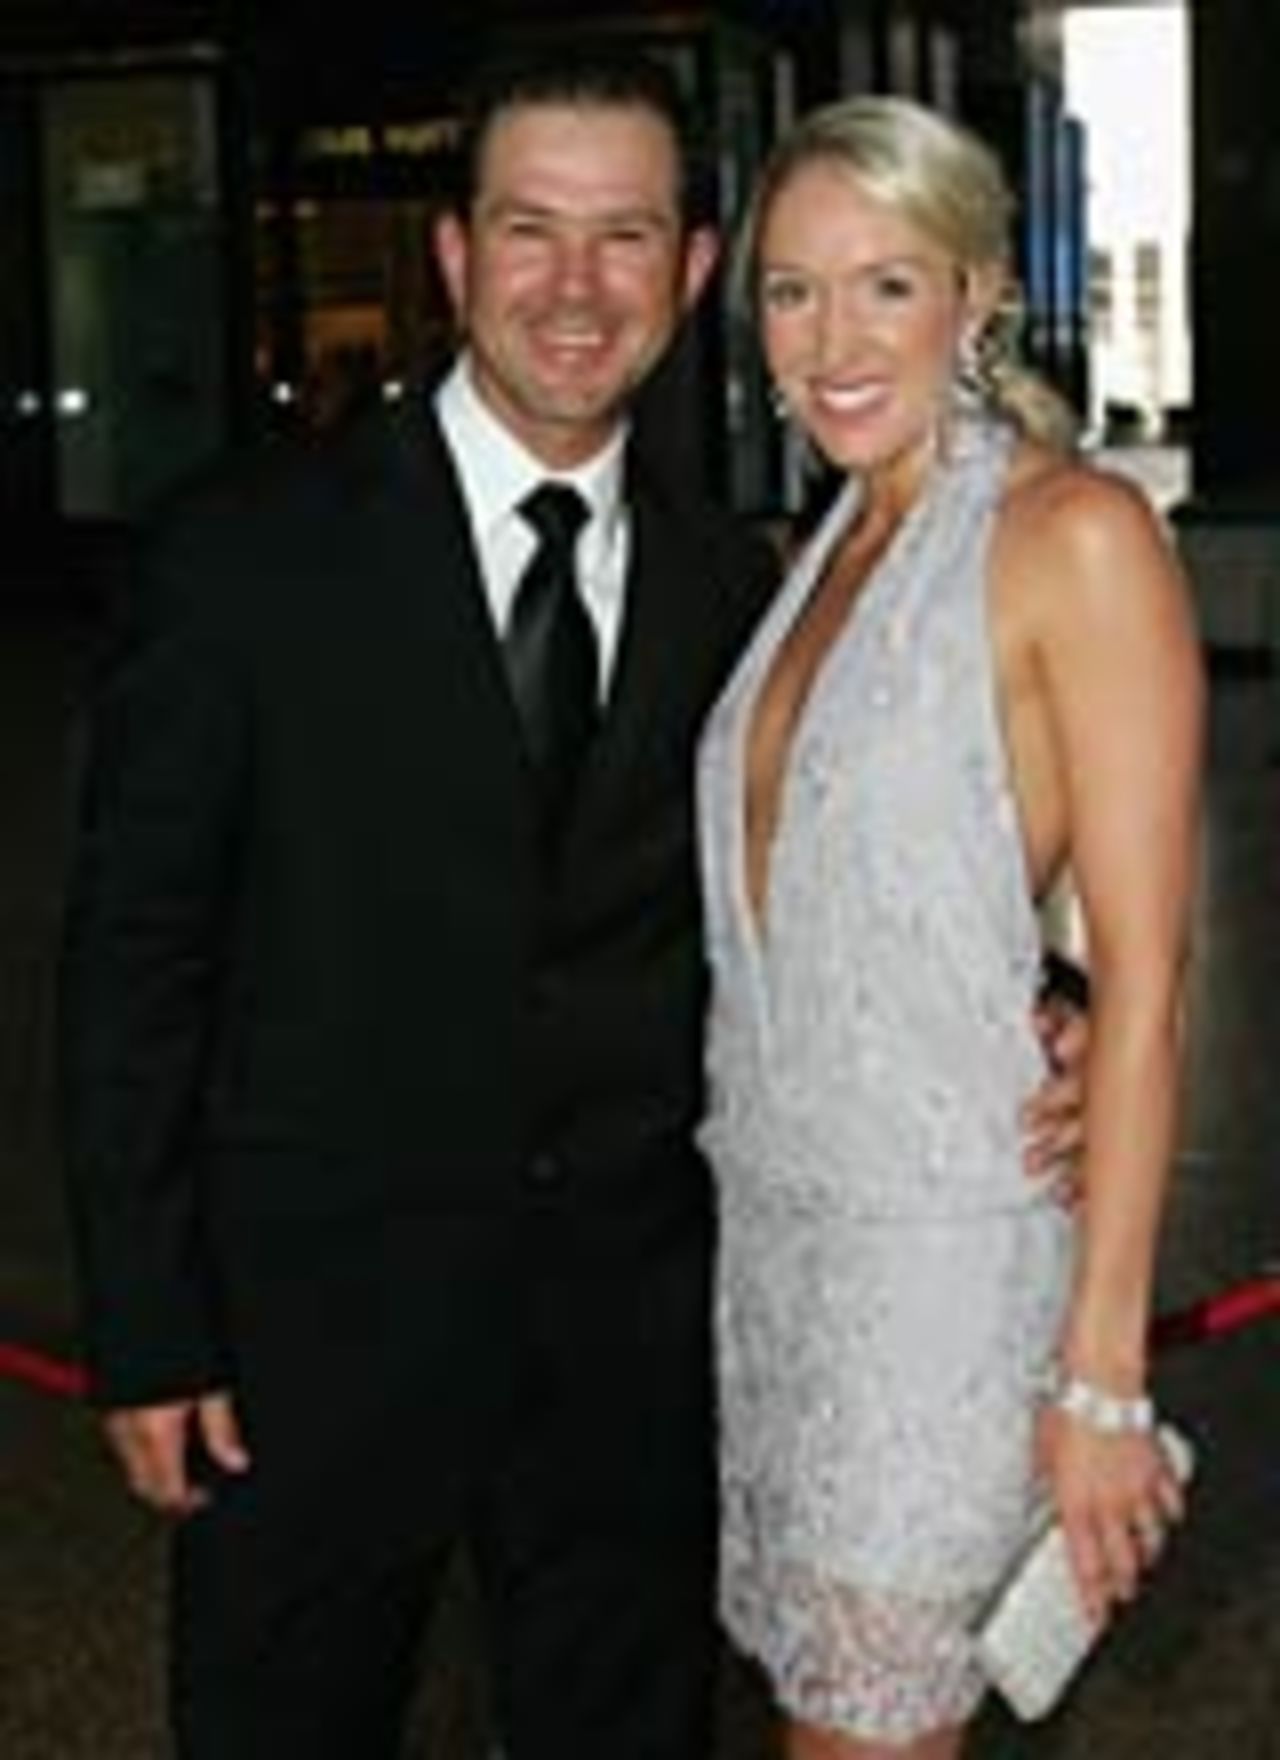 Ricky and Rianna Ponting arrive for the 2005 Allan Border Medal Dinner held at Crown Casino, Melbourne, January 31, 2005